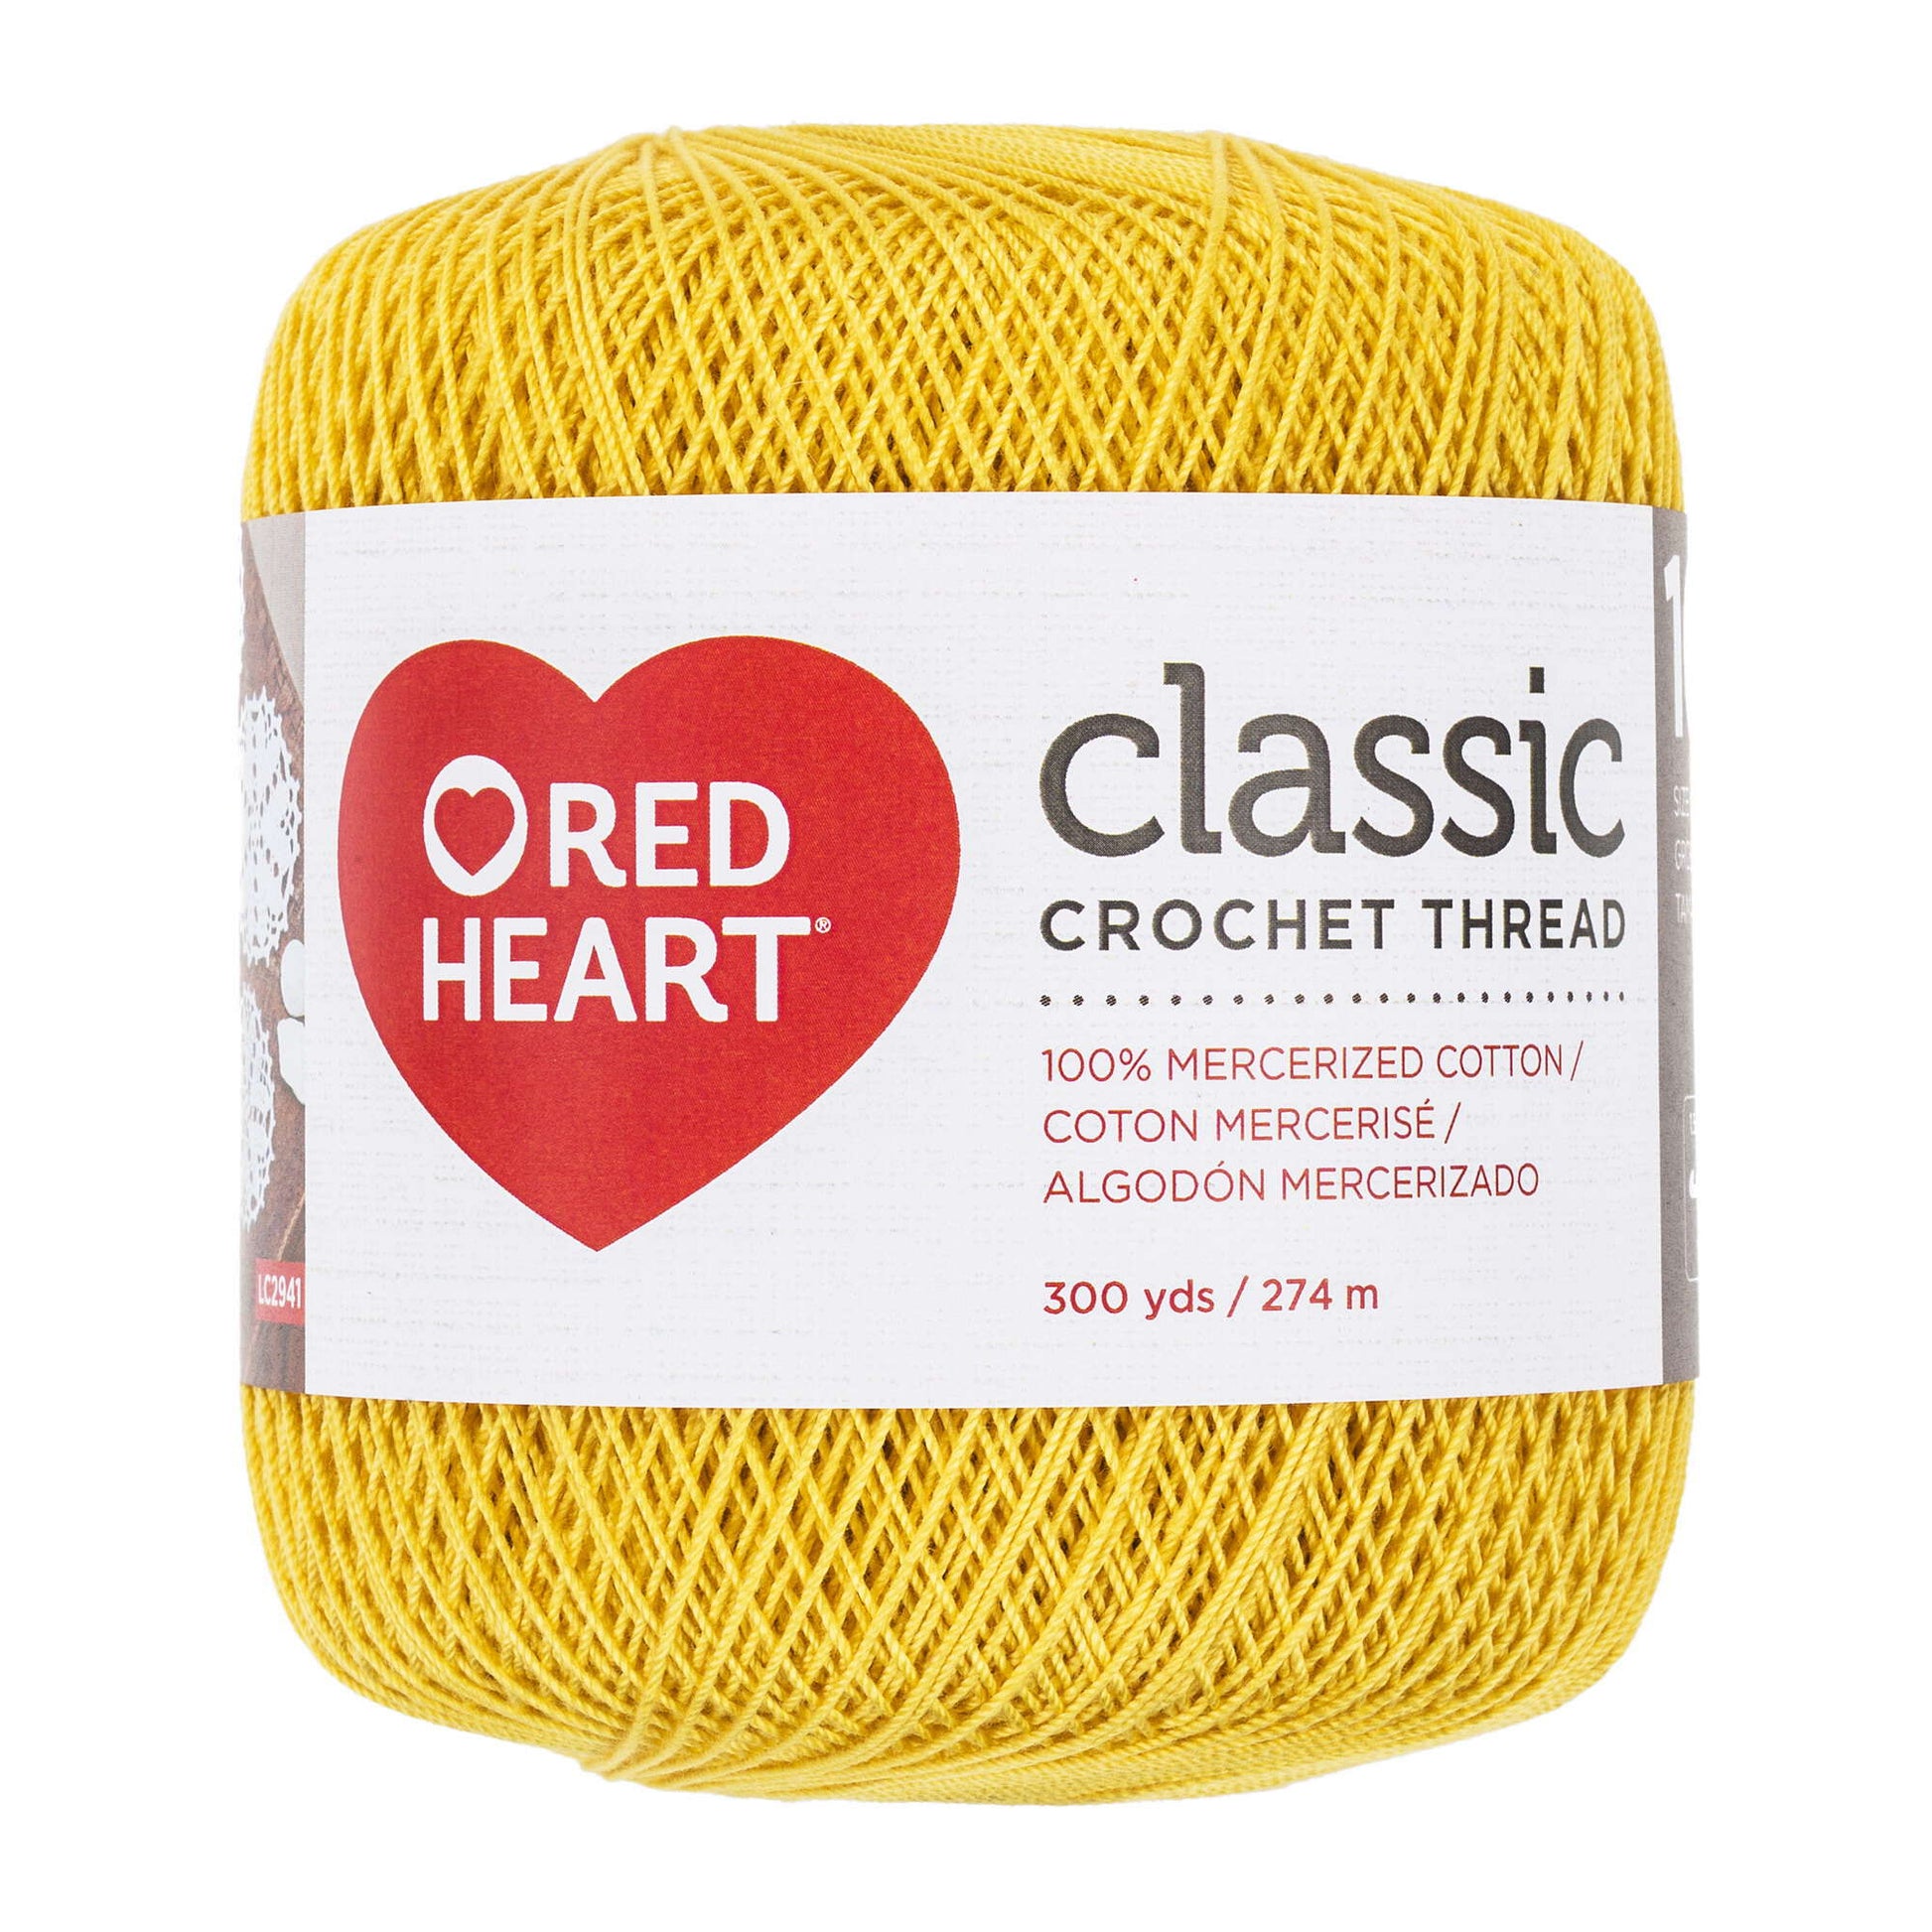 Red Heart Classic Crochet Thread Size 10 Red Heart Classic Crochet Thread Size 10